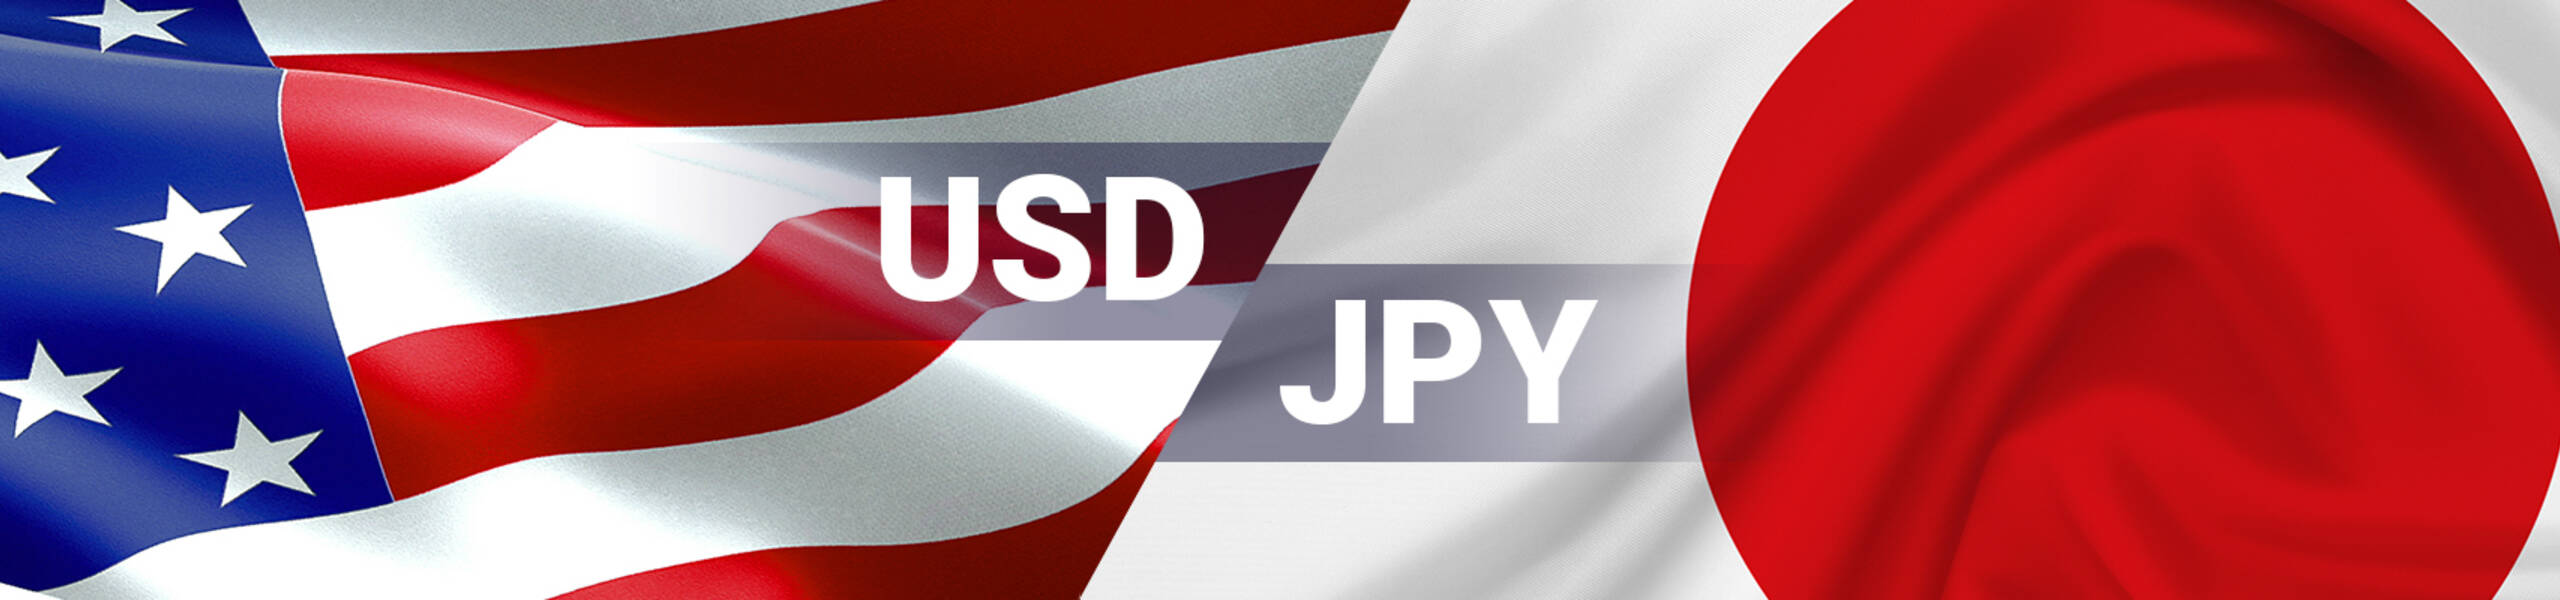 USD/JPY Dailyレポート 2017/07/14